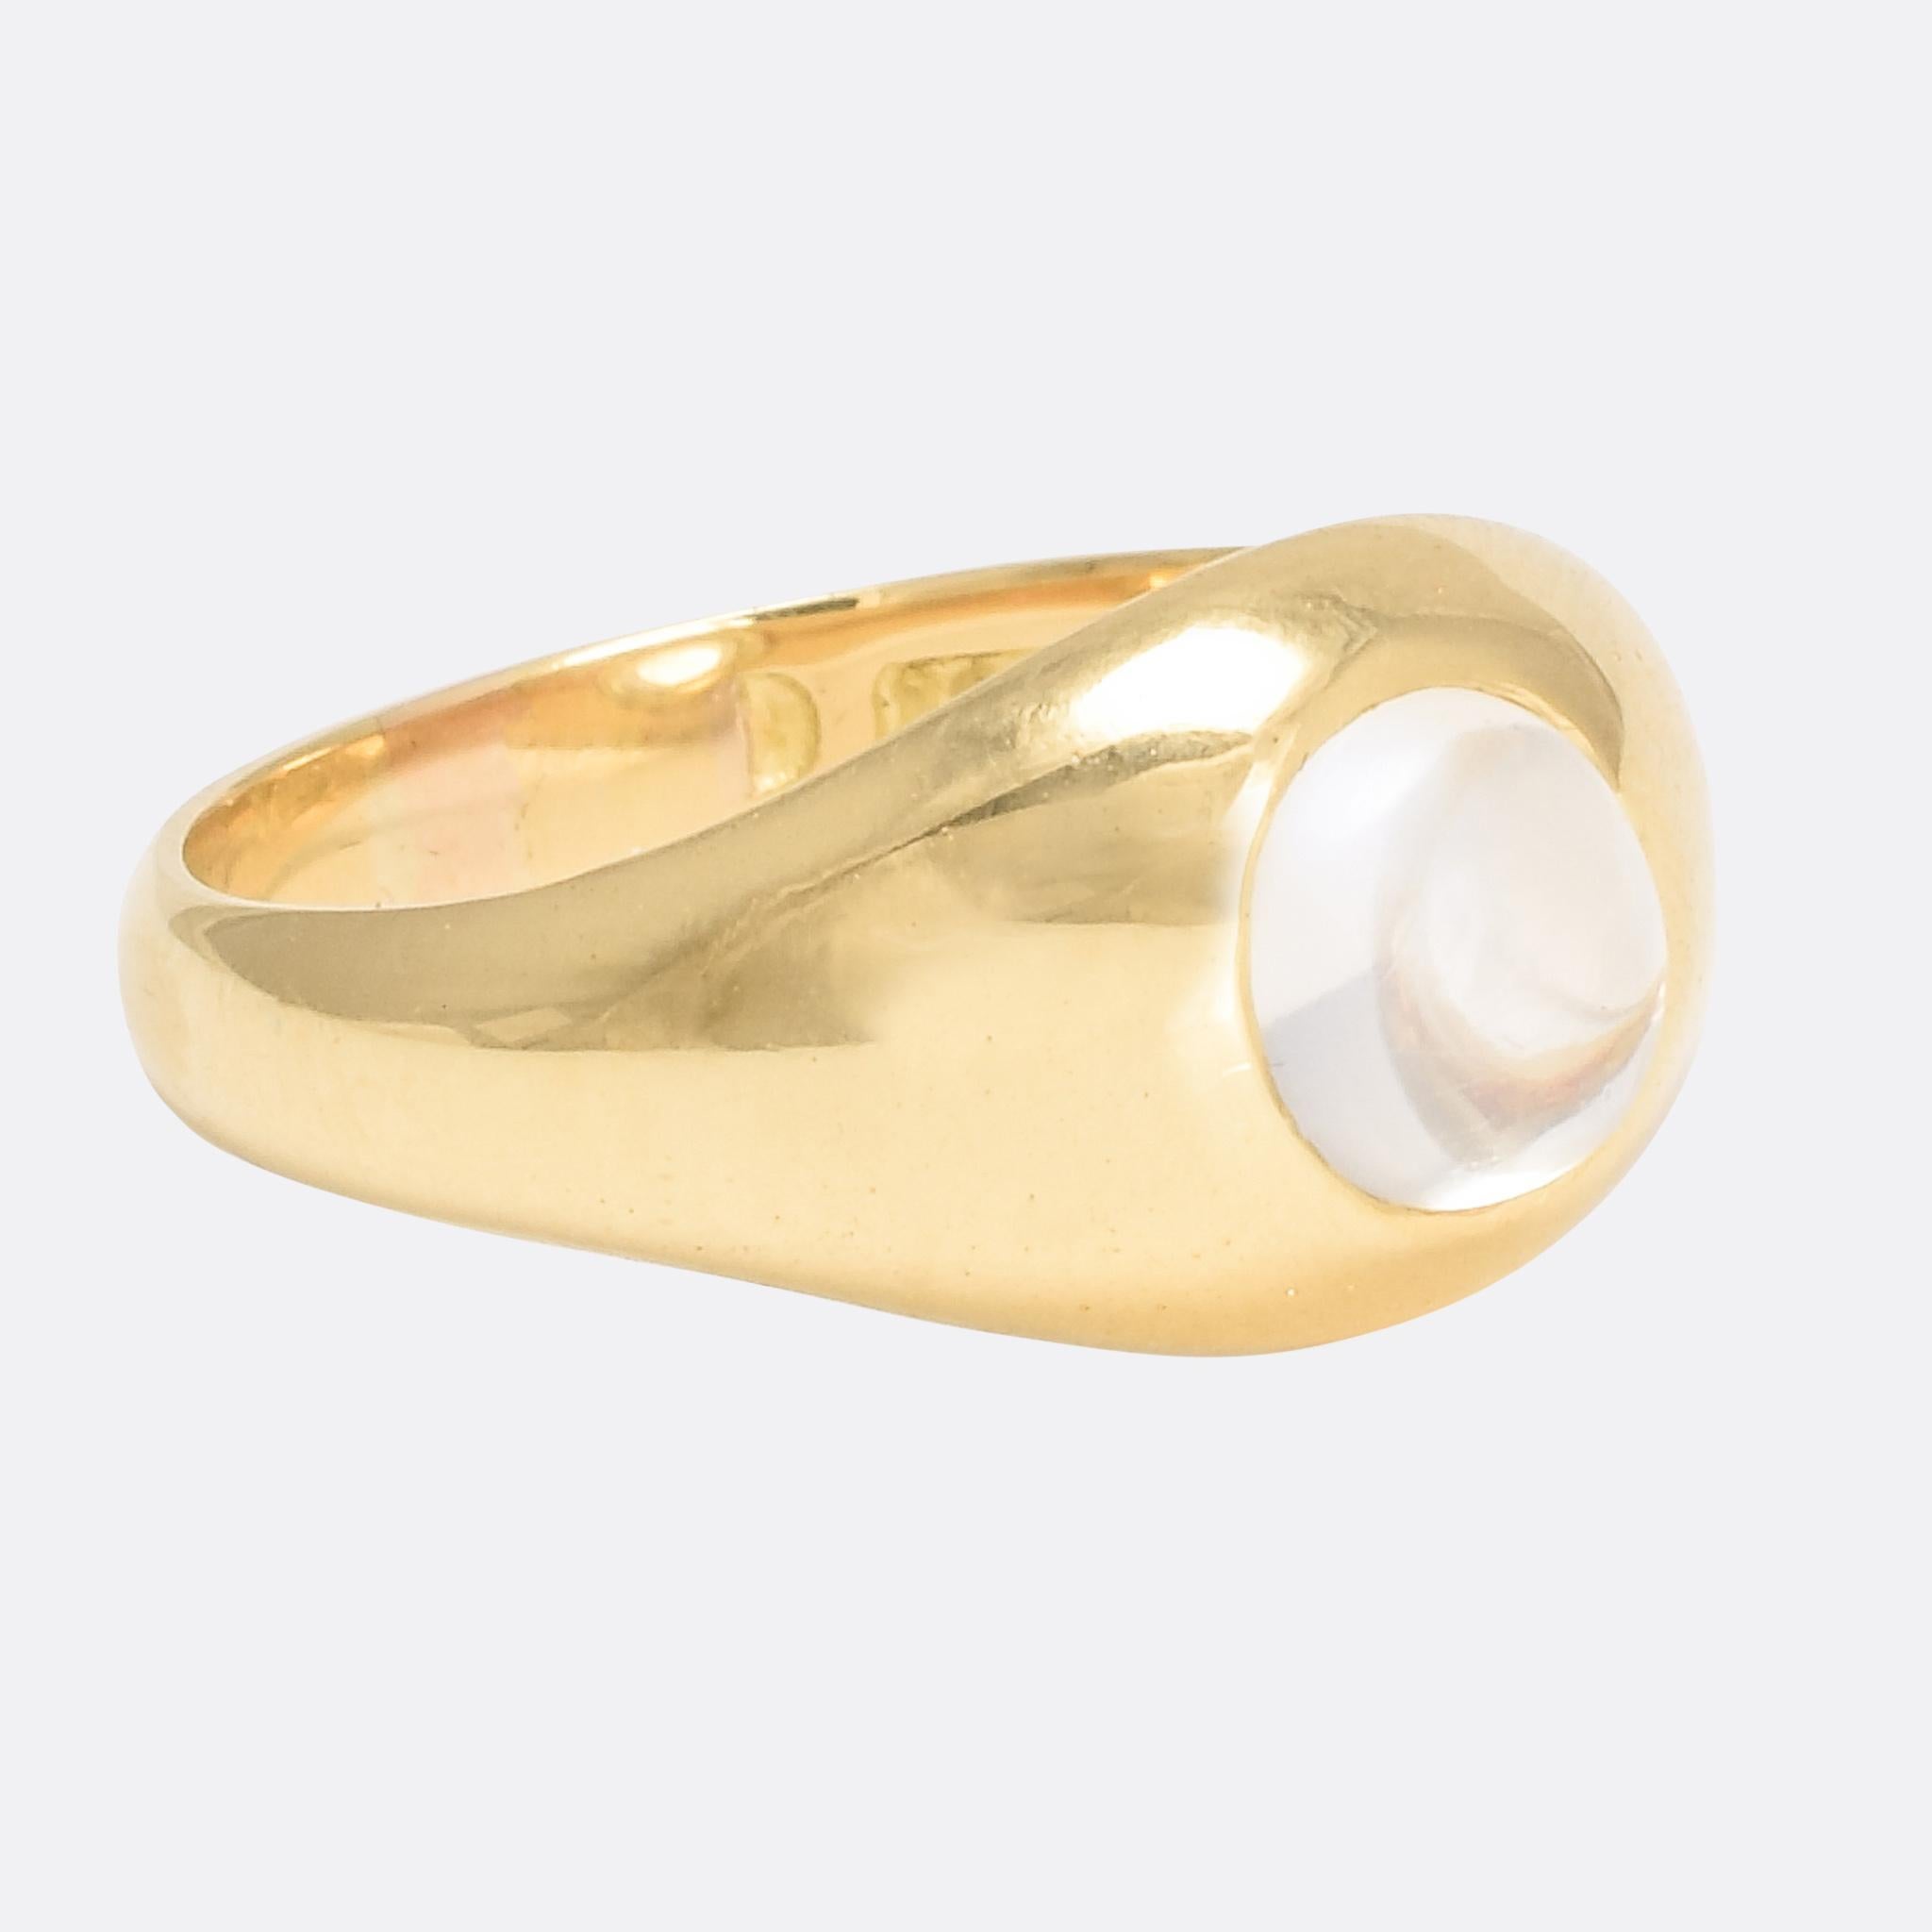 A classic solitaire gypsy ring set with an oval moonstone cabochon. Modelled in 18 karat gold, it dates from the latter half of the 19th Century - circa 1880. A popular style, suitable for women and men alike.

STONES 
Natural Moonstone - 6.5 x